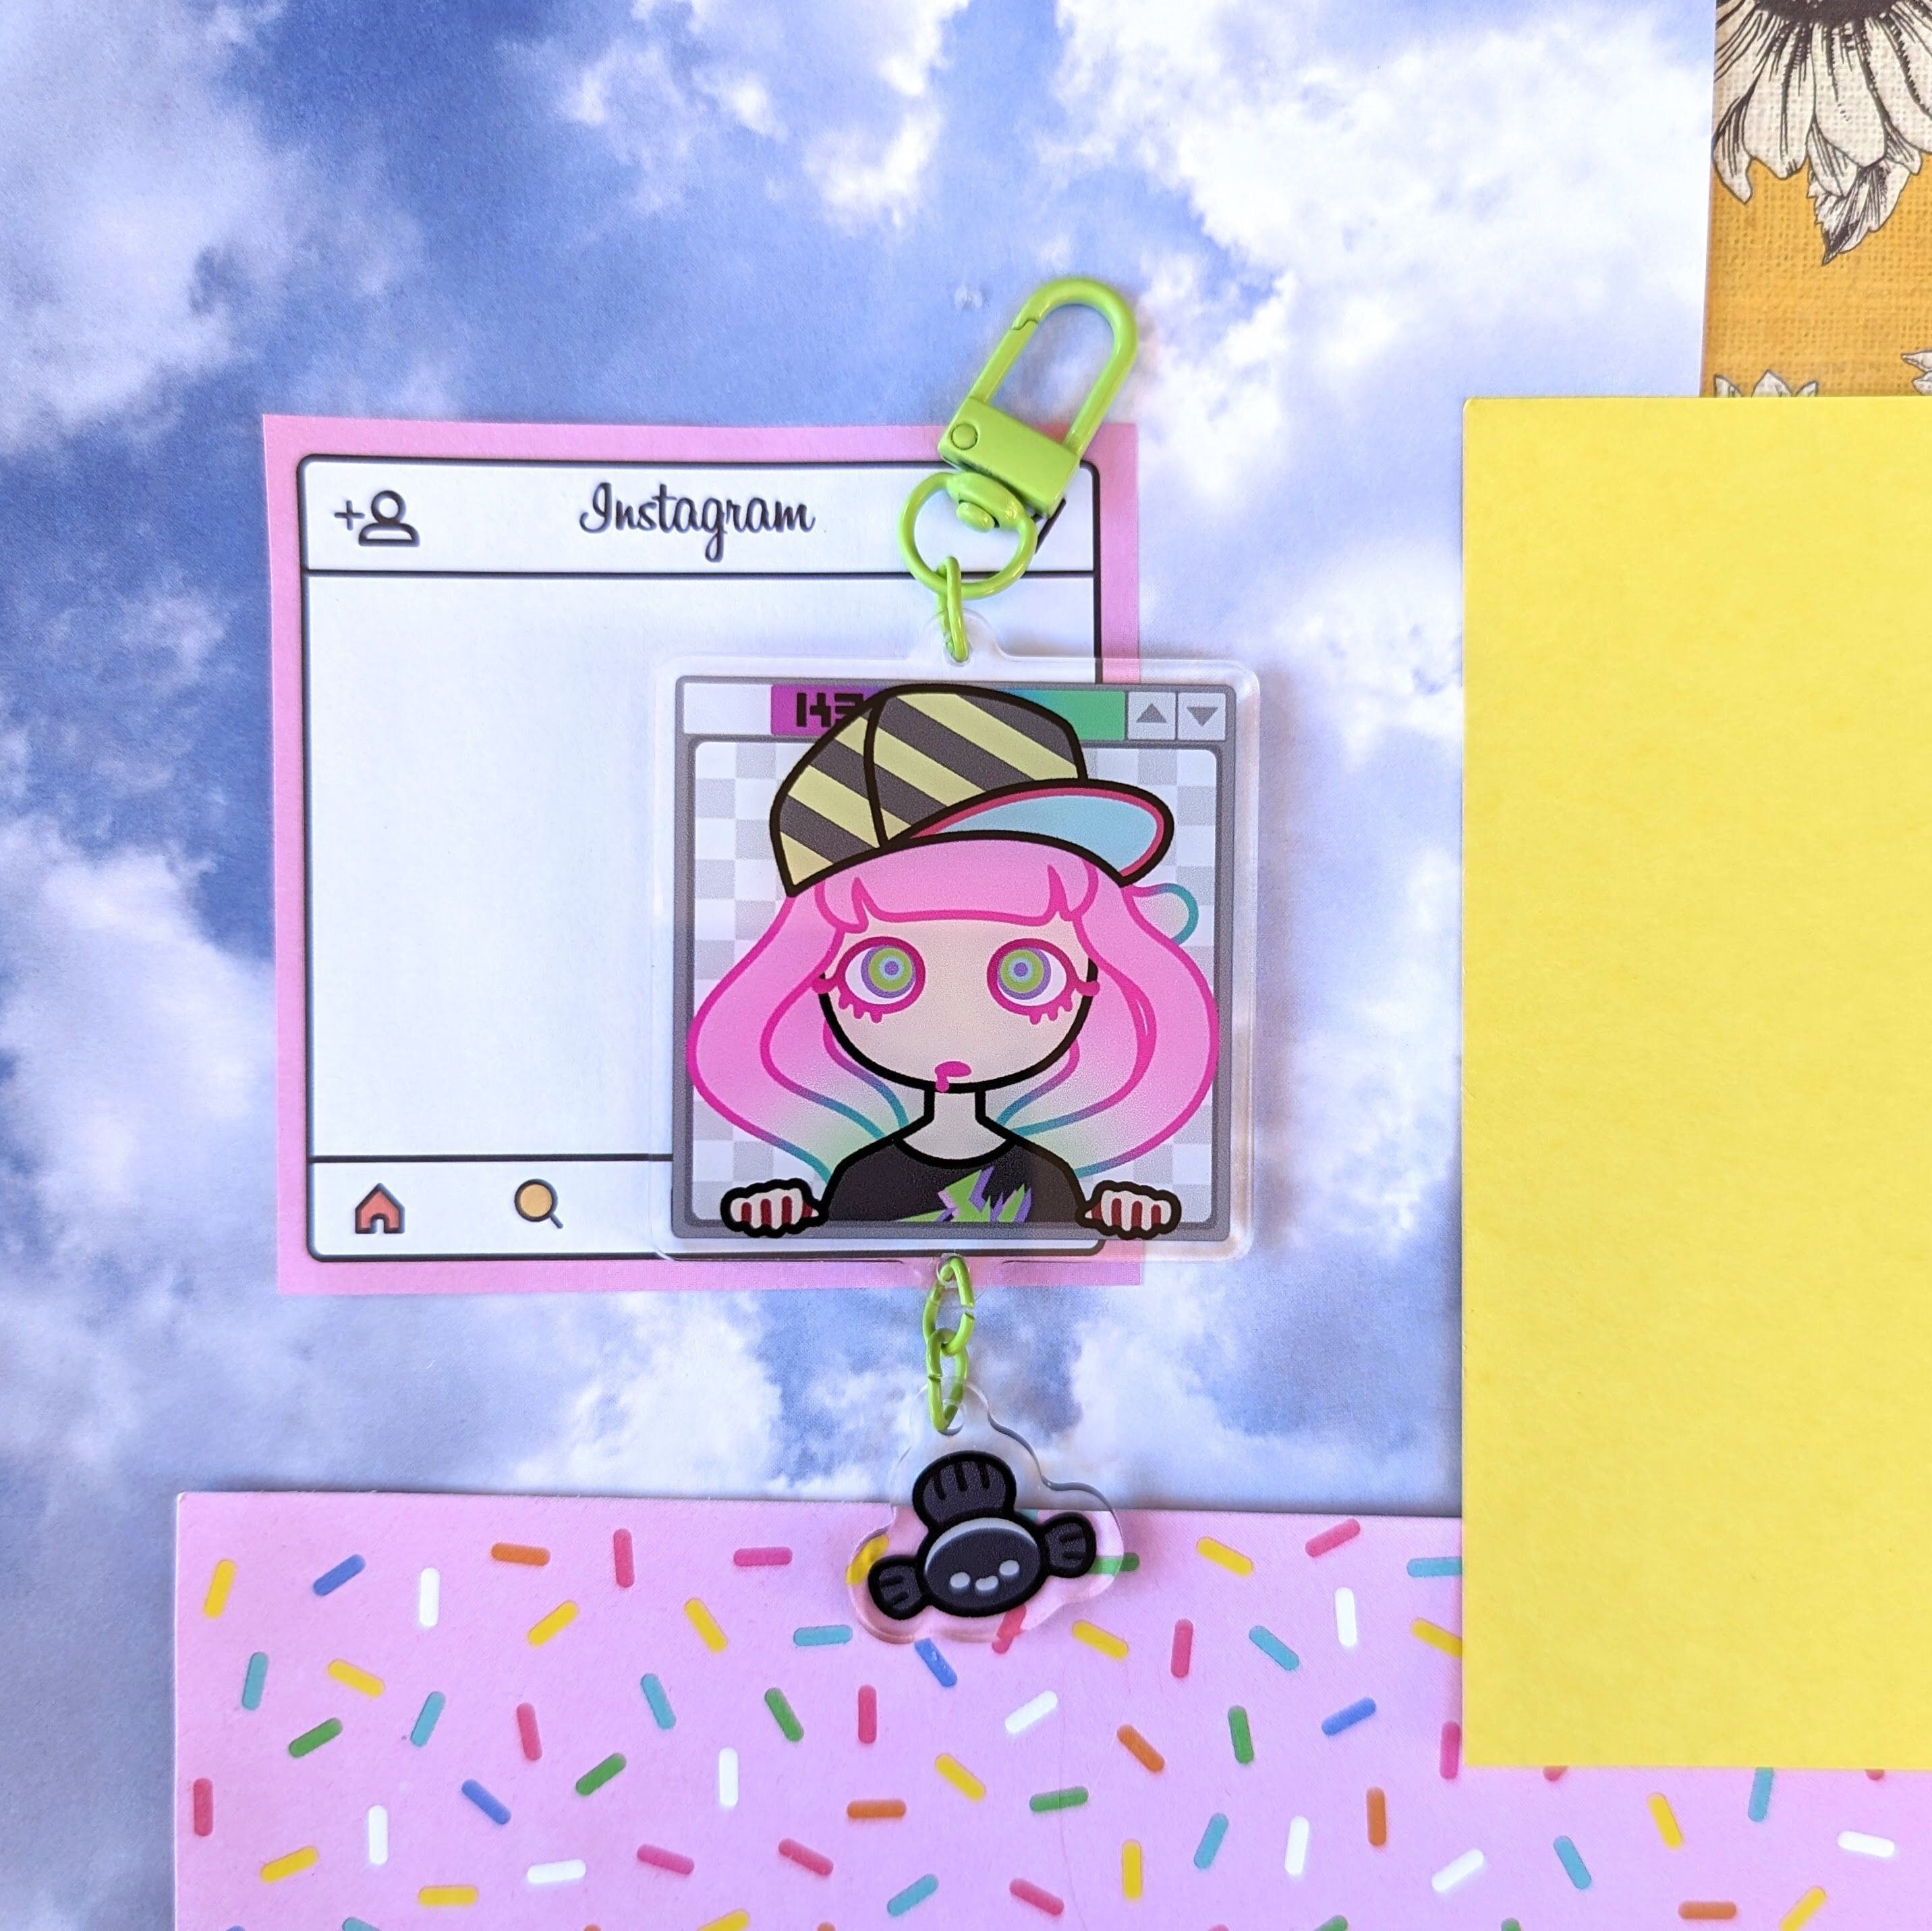 A keychain with a cartoon image of a girl with pink hair and a baseball cap. - Internetcore